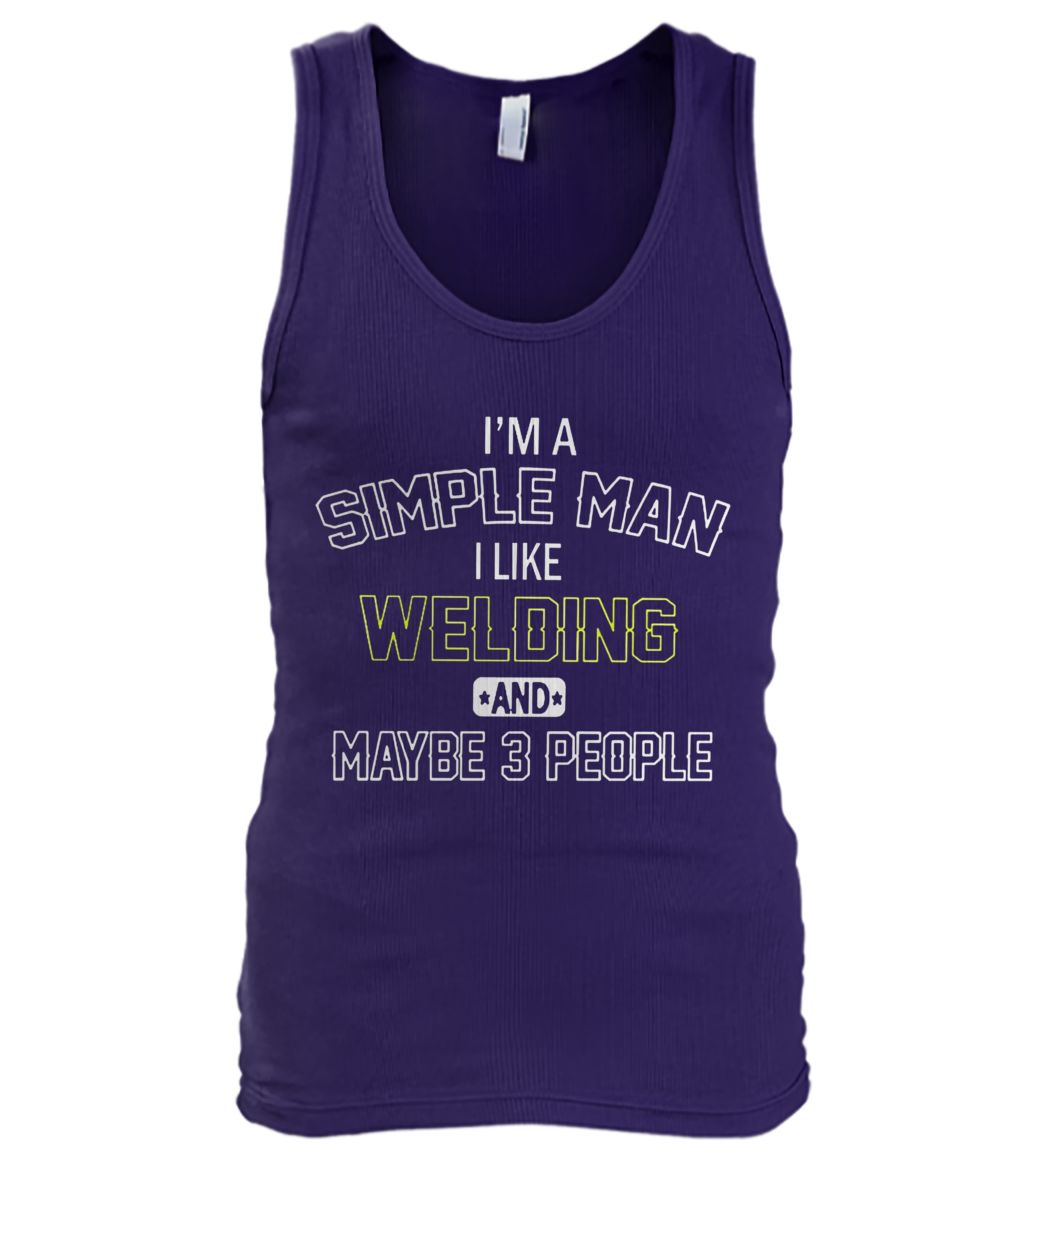 I'm a simple man I like welding and maybe 3 people men's tank top